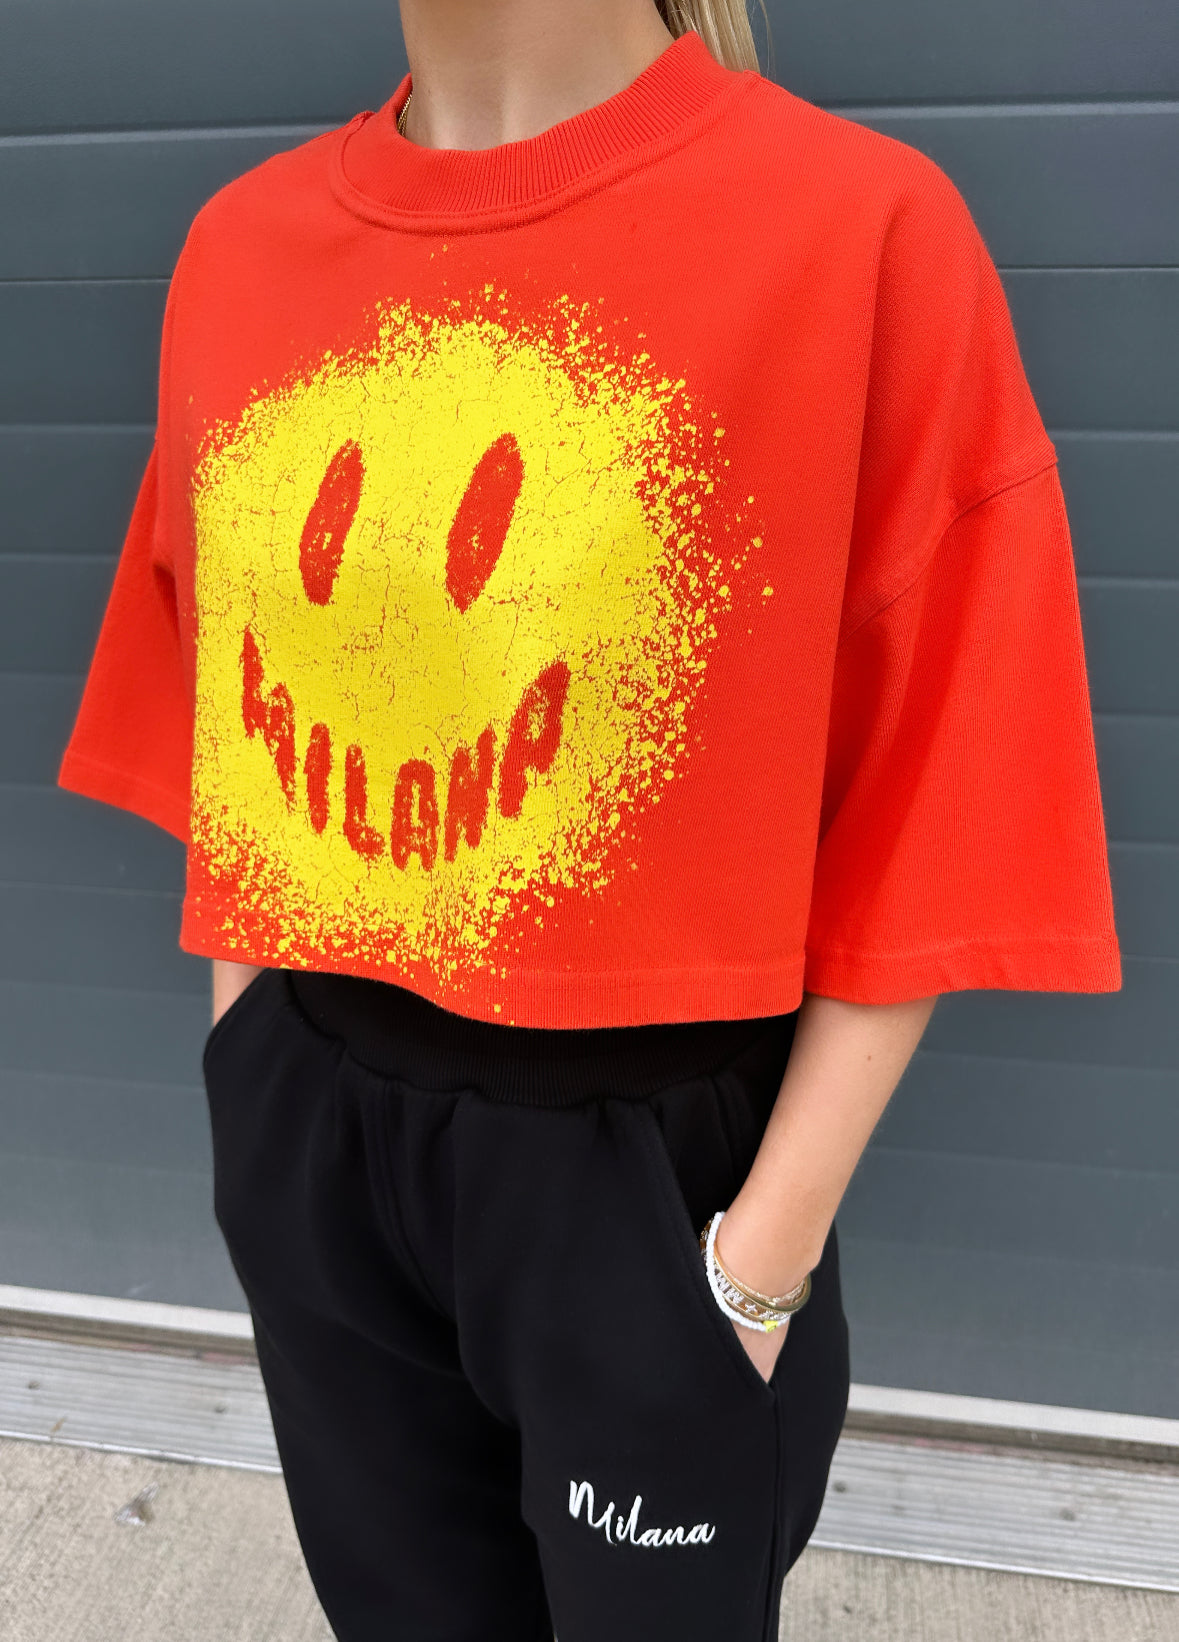 Red Splatter Smiley Cropped Heavyweight T-shirt.